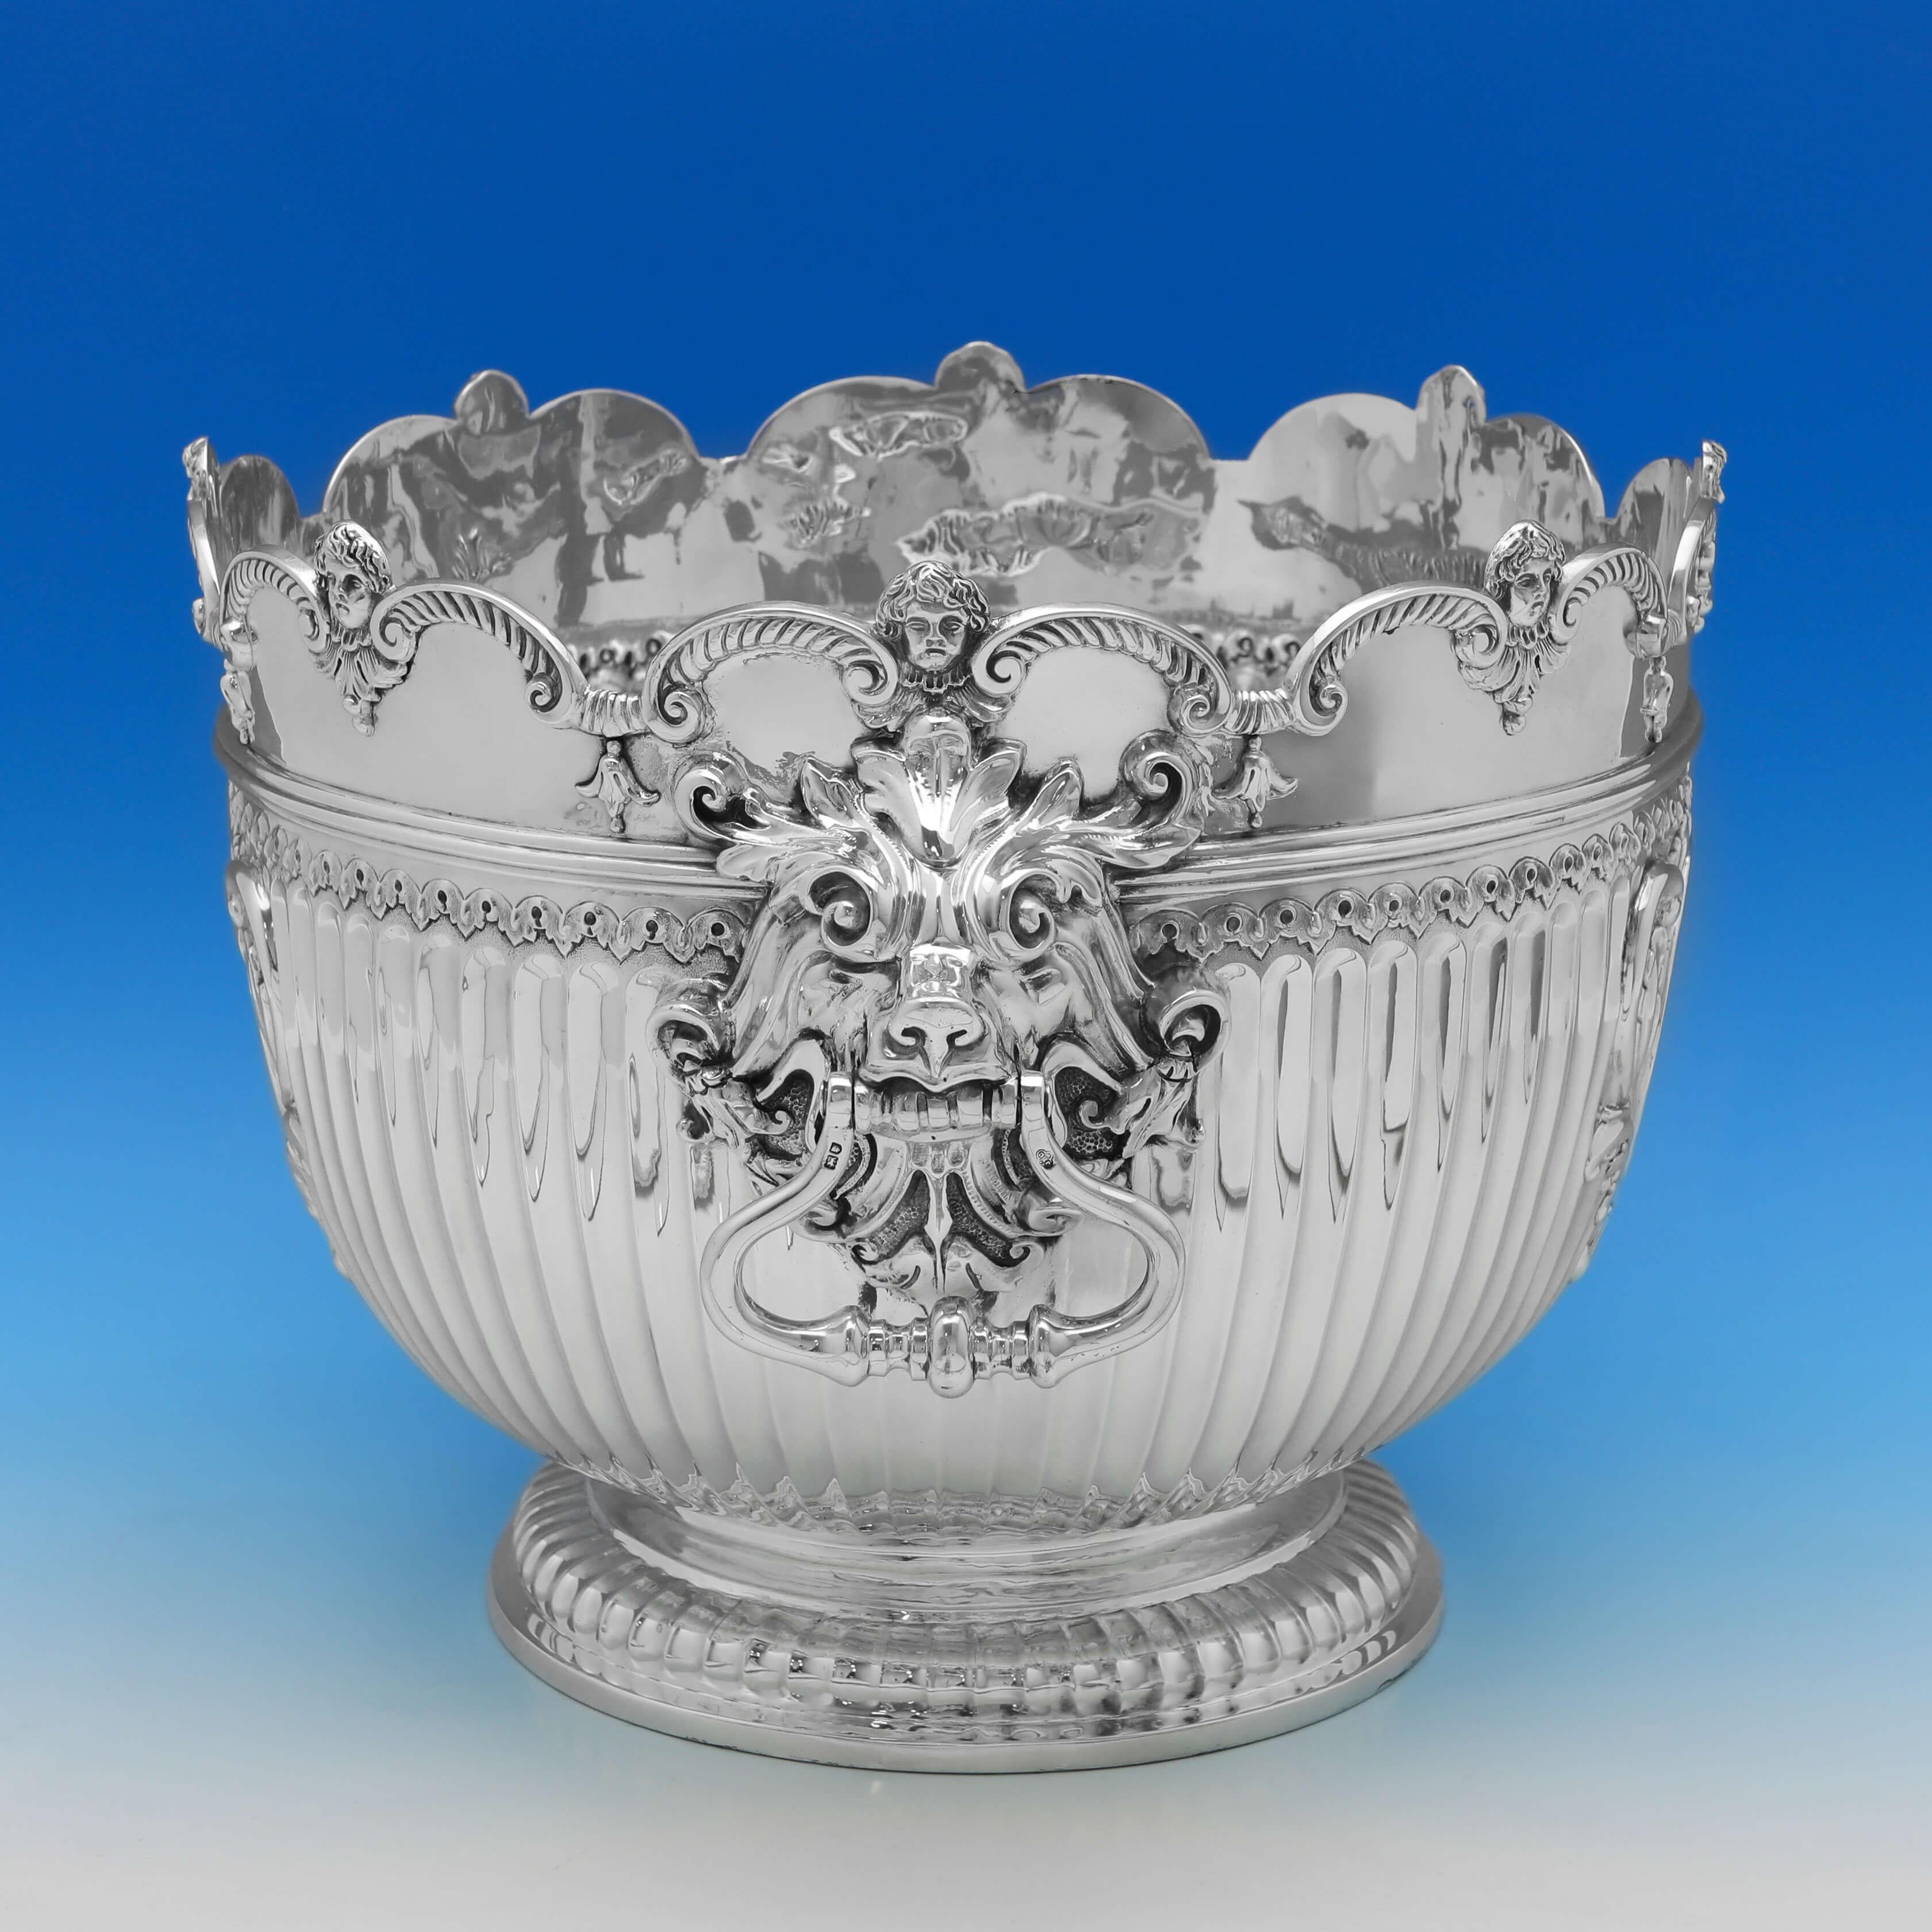 Hallmarked in London in 1904 by Carrington & Co., this handsome, Edwardian, antique sterling silver bowl, is in the 'Monteith' style, with lion mask drop rings handles, sunken fluting and s shaped rim. The bowl measures 11.25